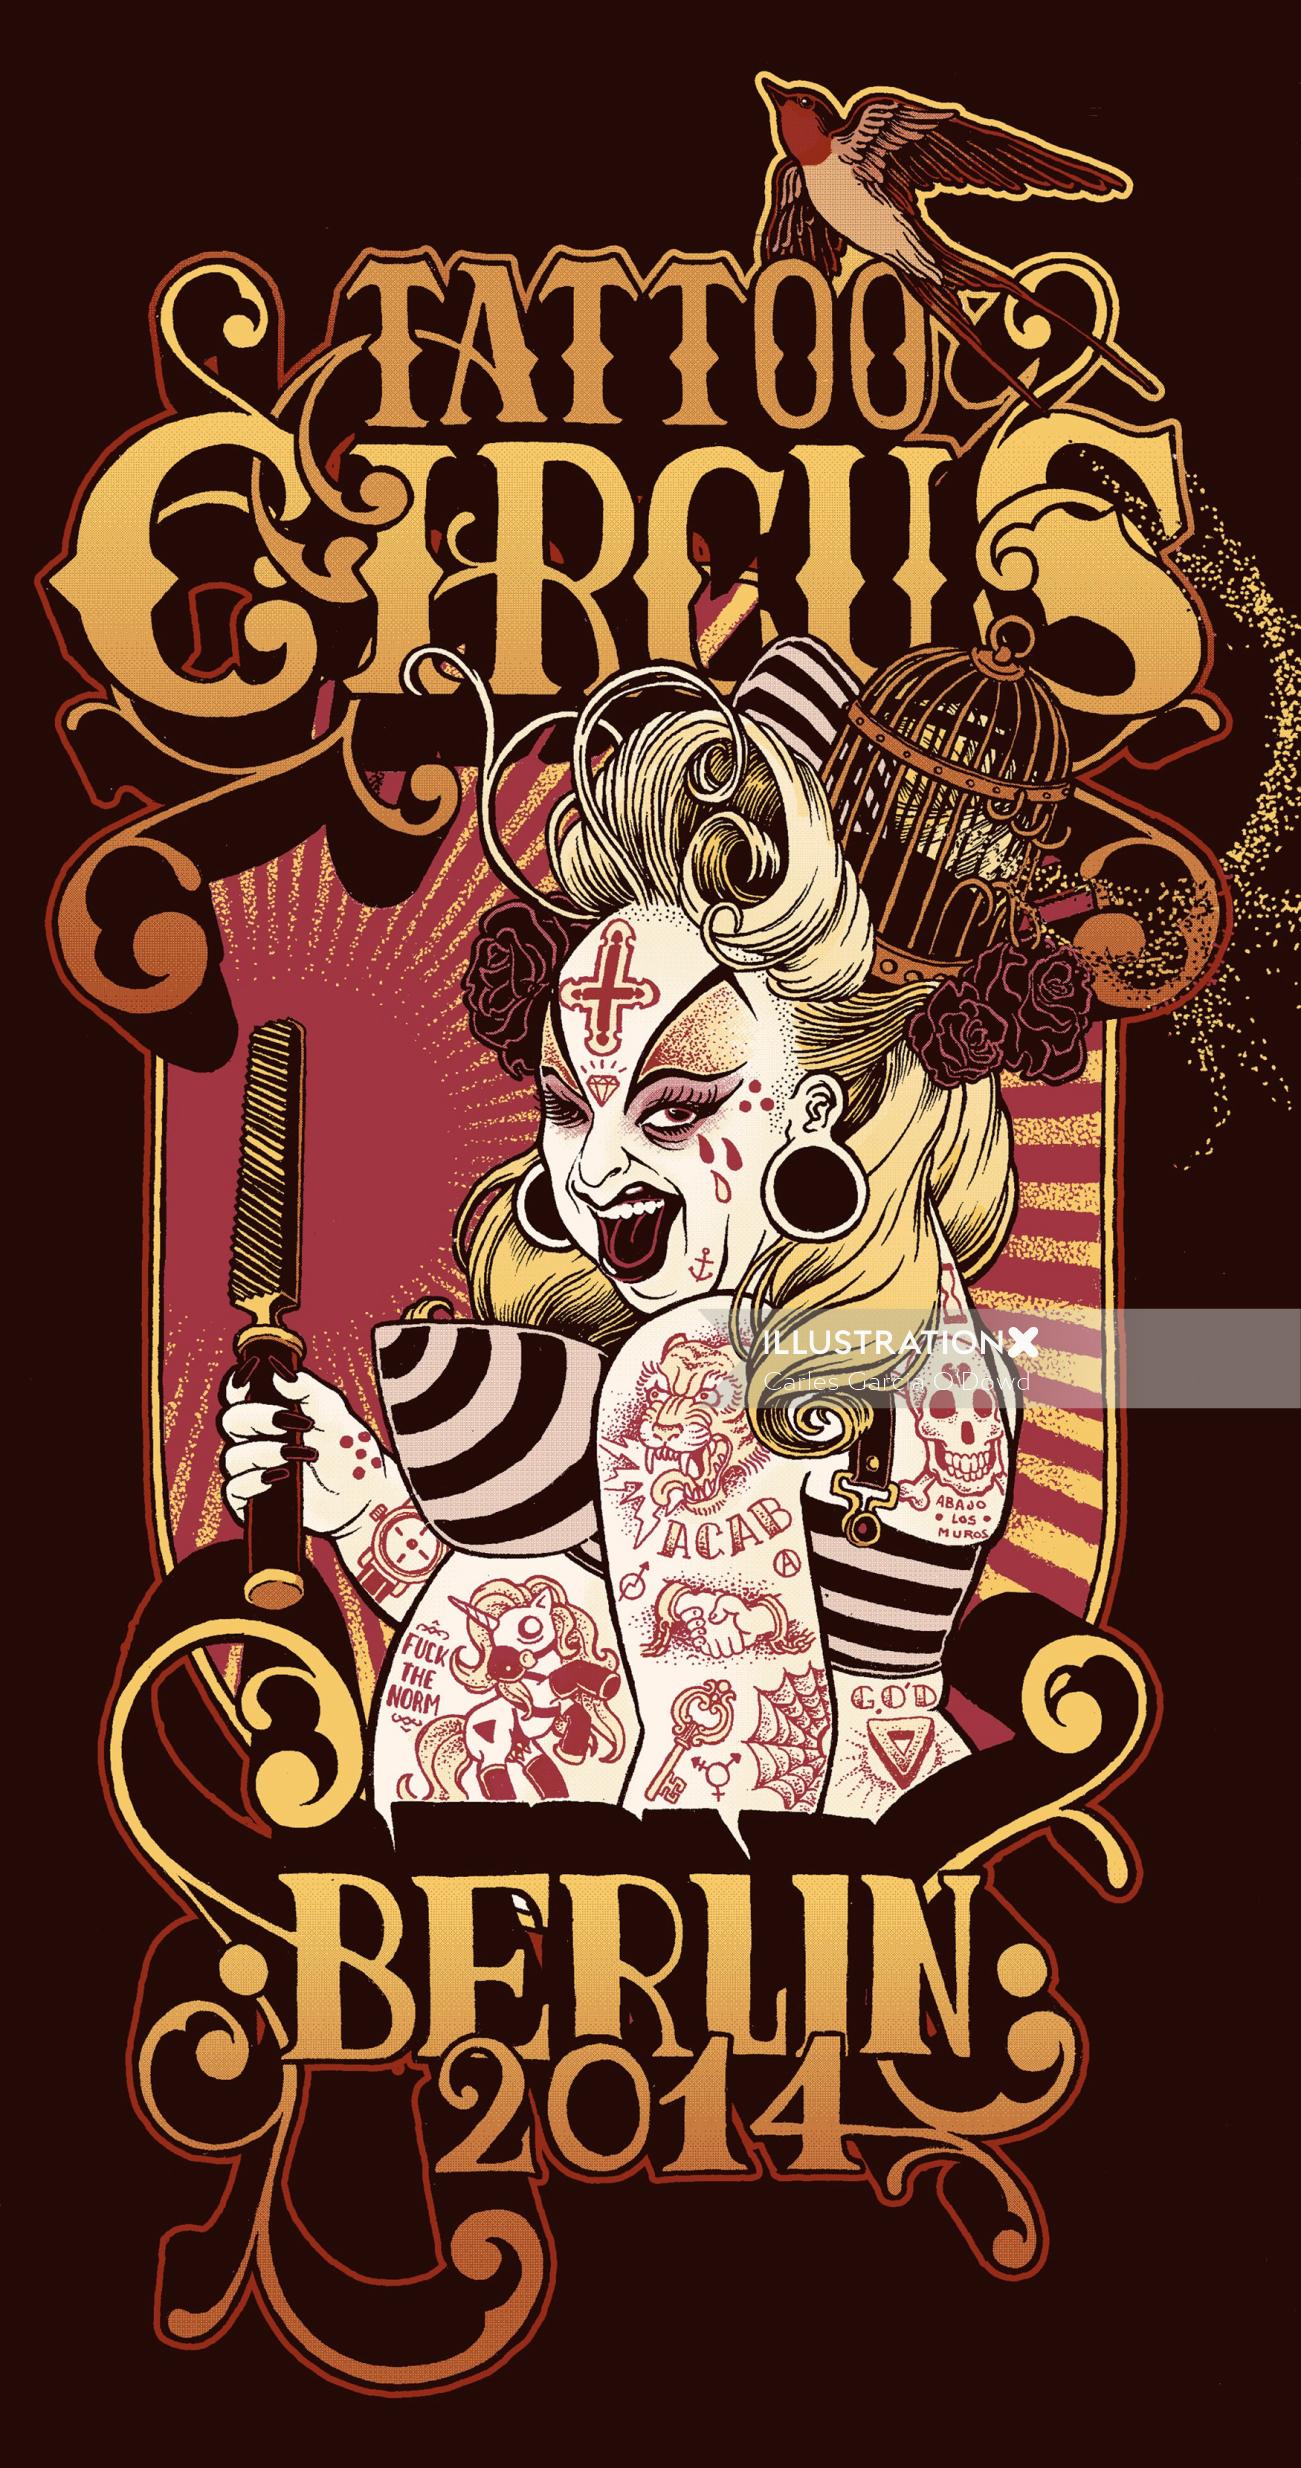 Poster for the 2014 Berlin Tattoo Circus